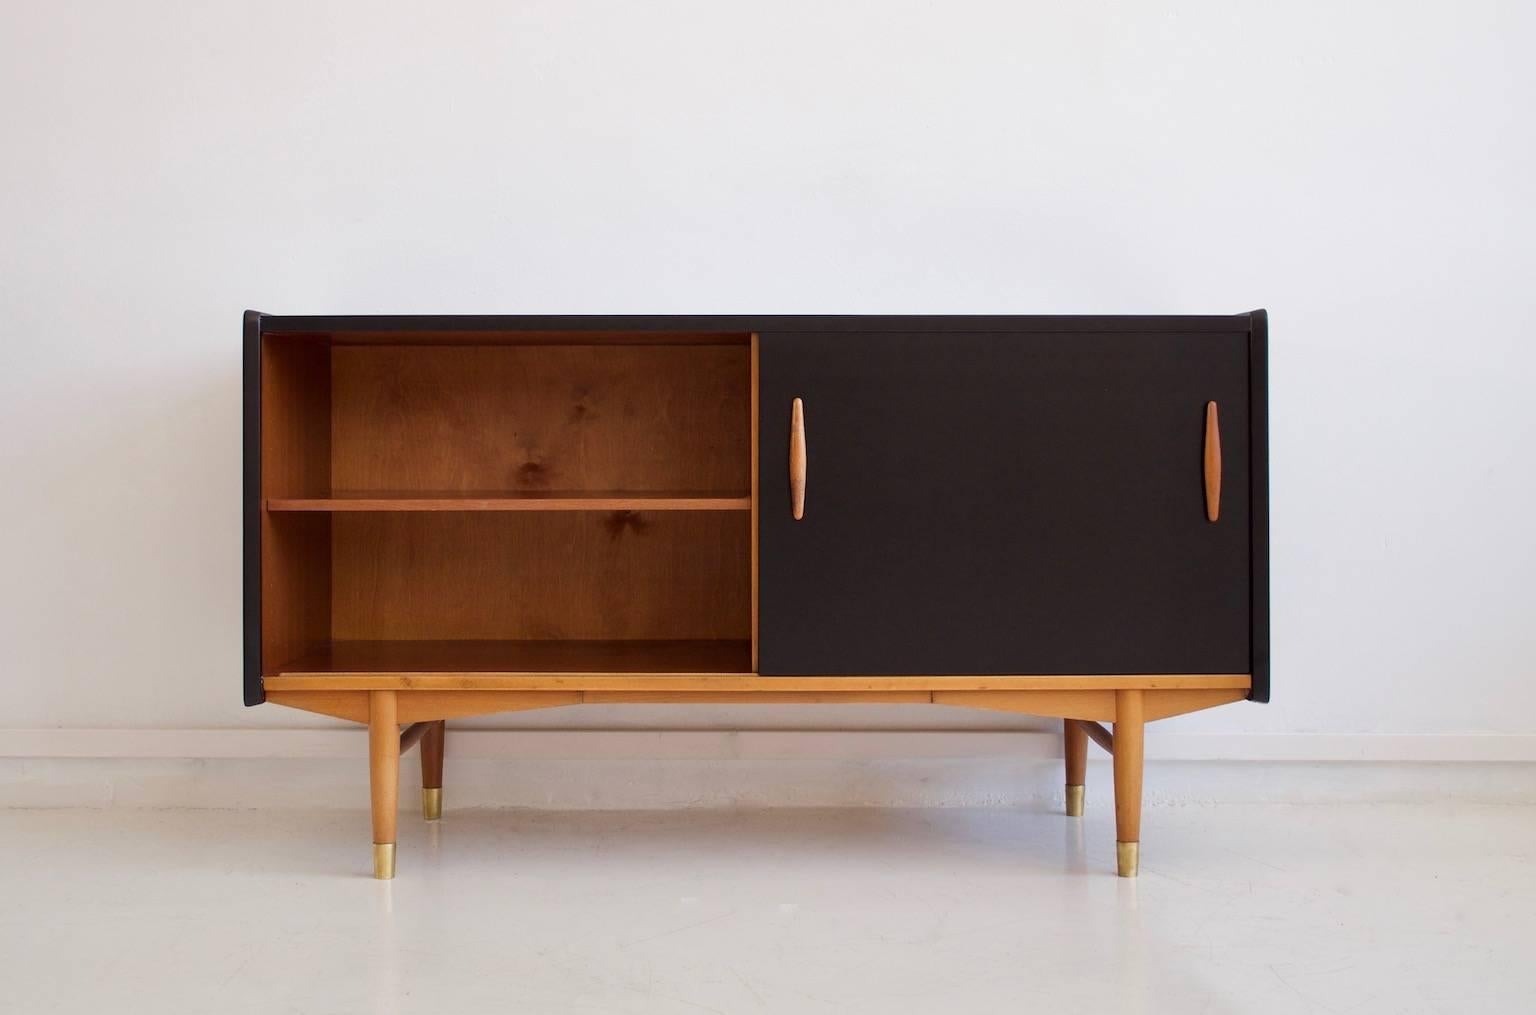 Teak veneer sideboard with black laminate front door and five drawers designed by Hugo Troeds in 1957. Legs in beech with brass finish. Back labeled with Hugo Troeds, Bjärnum.